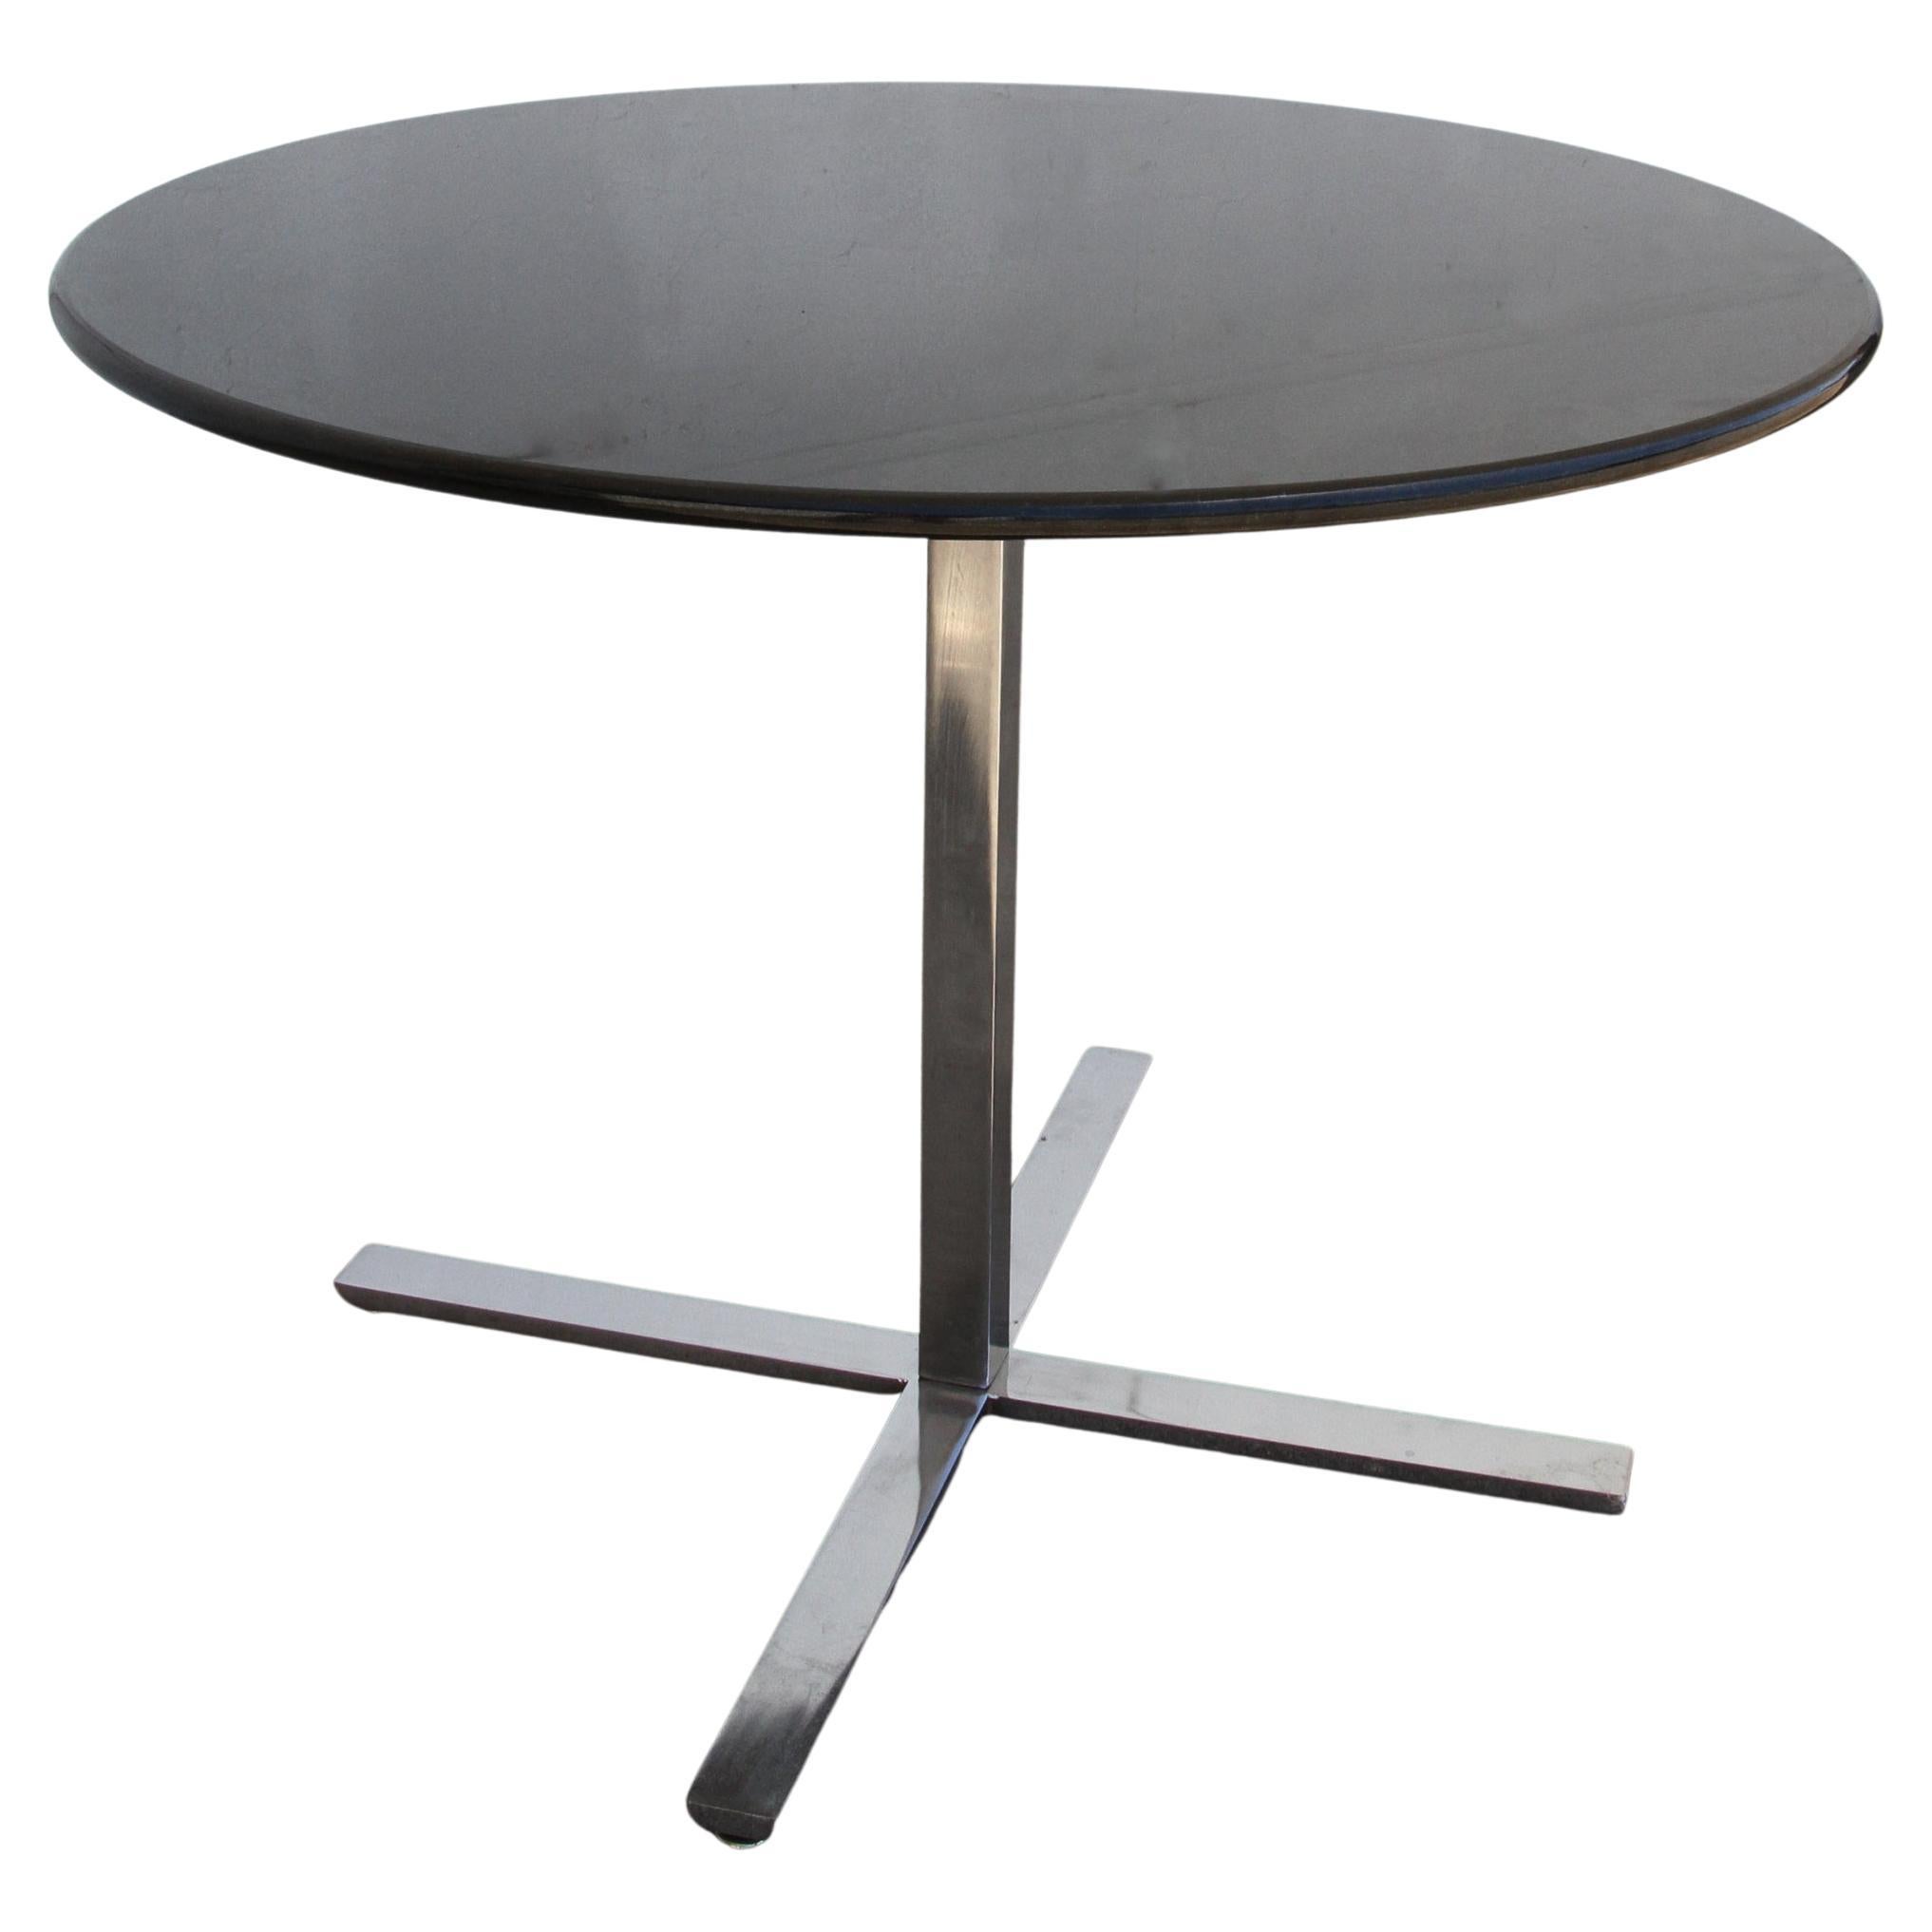 Steelcase 38” Diameter Round Granite Table with Stainless Base 